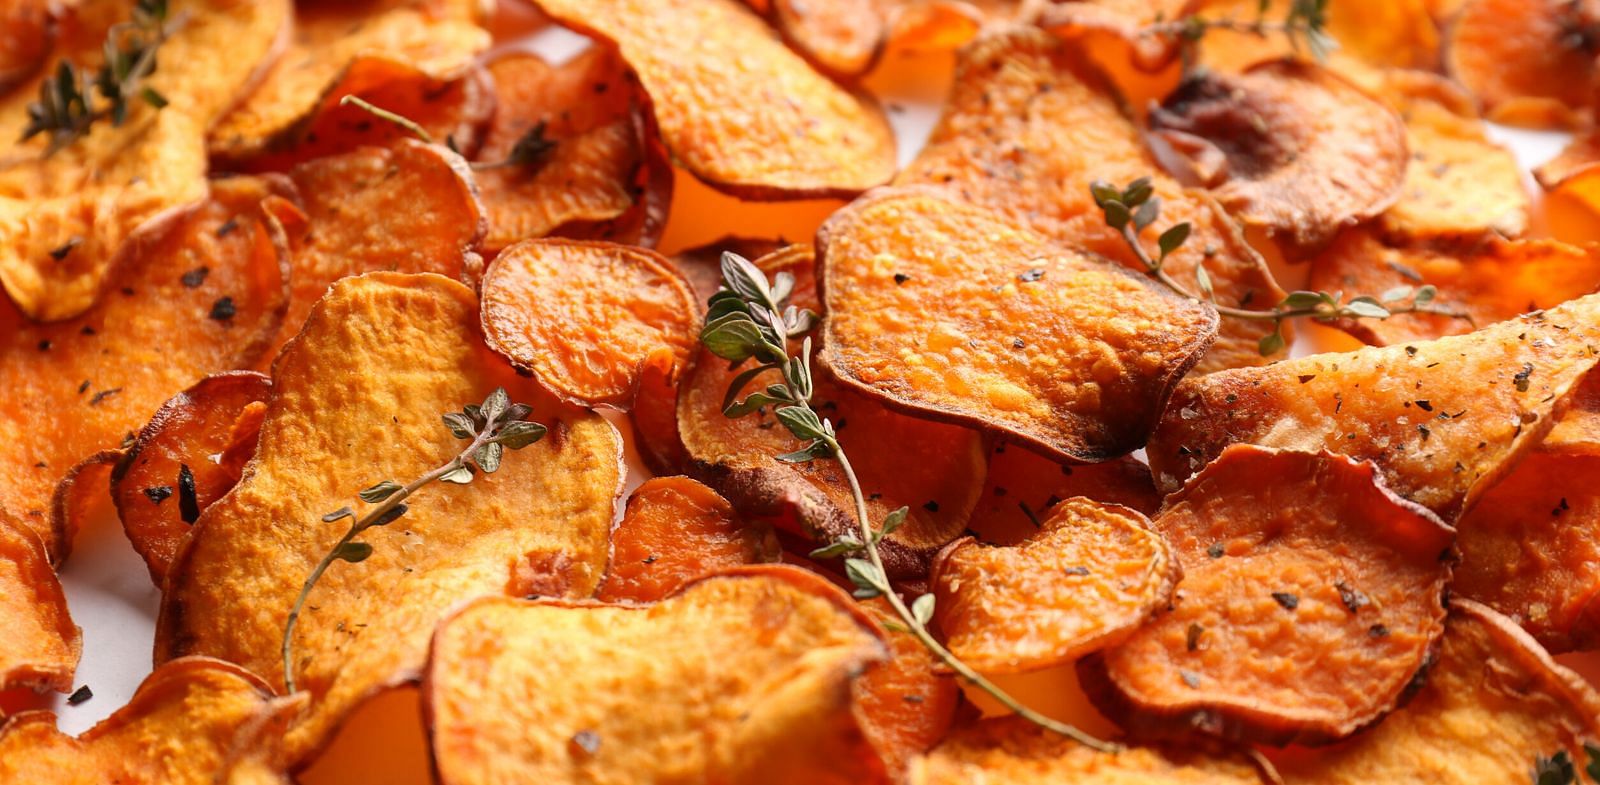 news-on-sweet-potato-chips-from-the-democratic-people-s-republic-of-korea